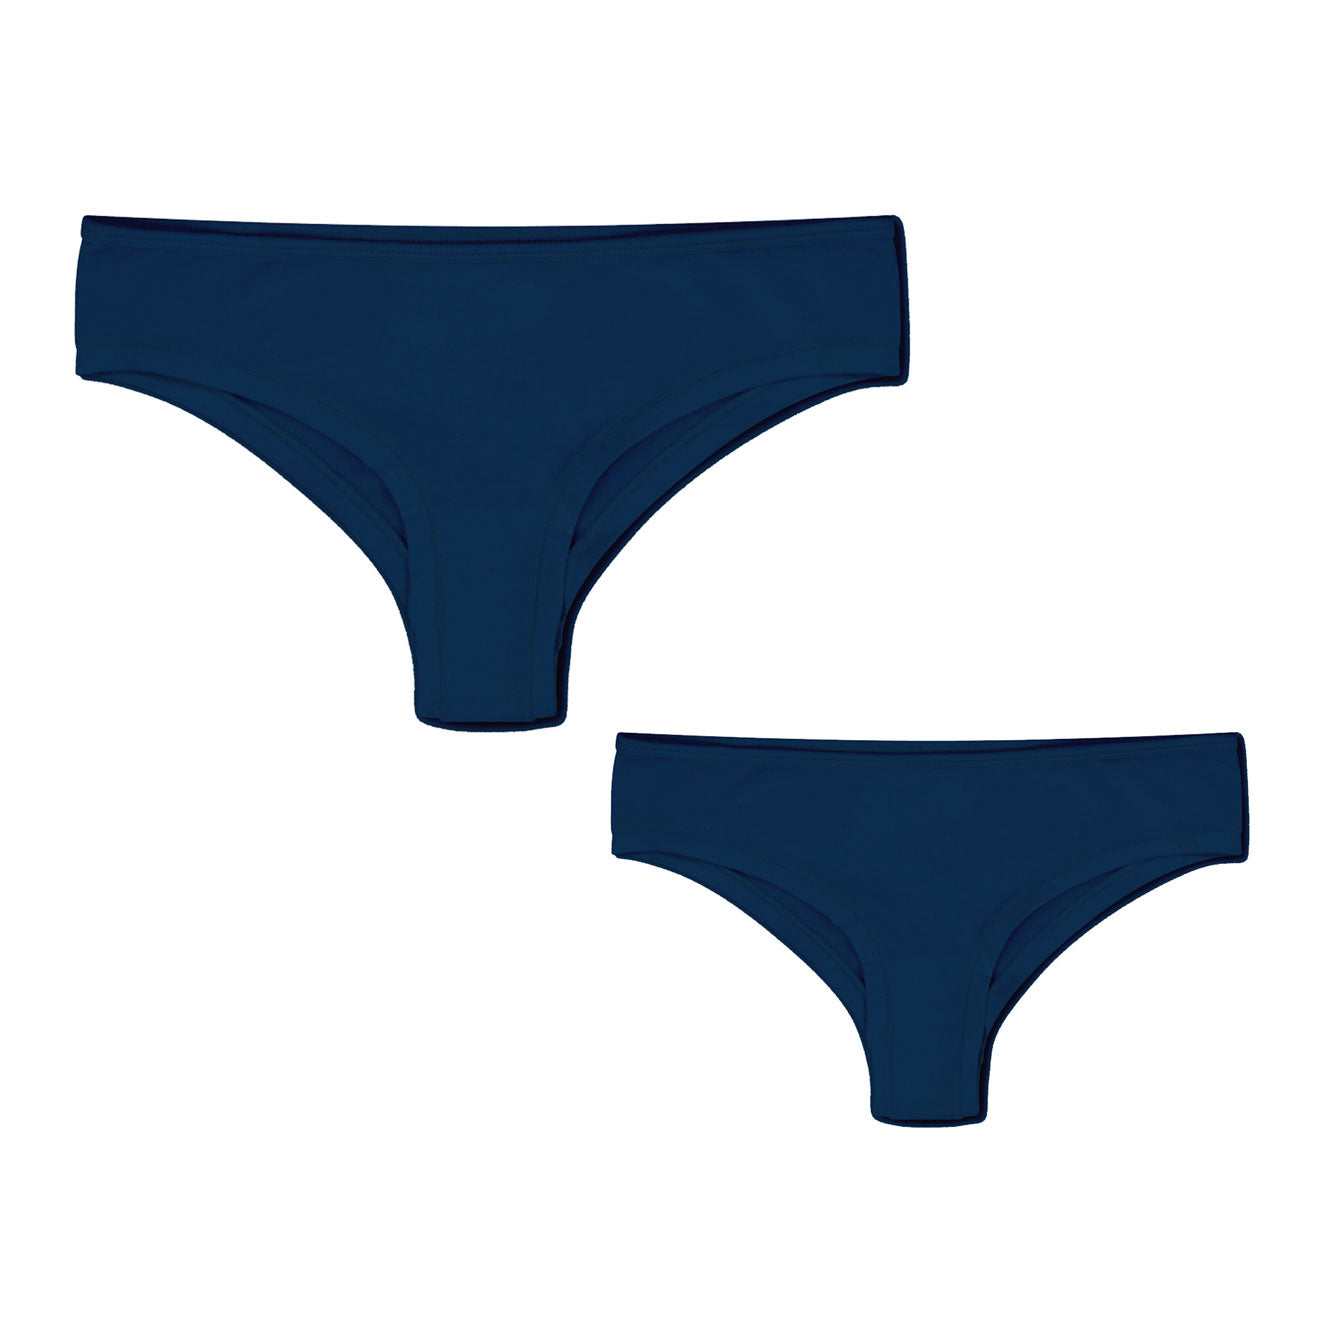 Navy ladies underwear, everyday cheeky fit briefs, first fit promise 2 pack